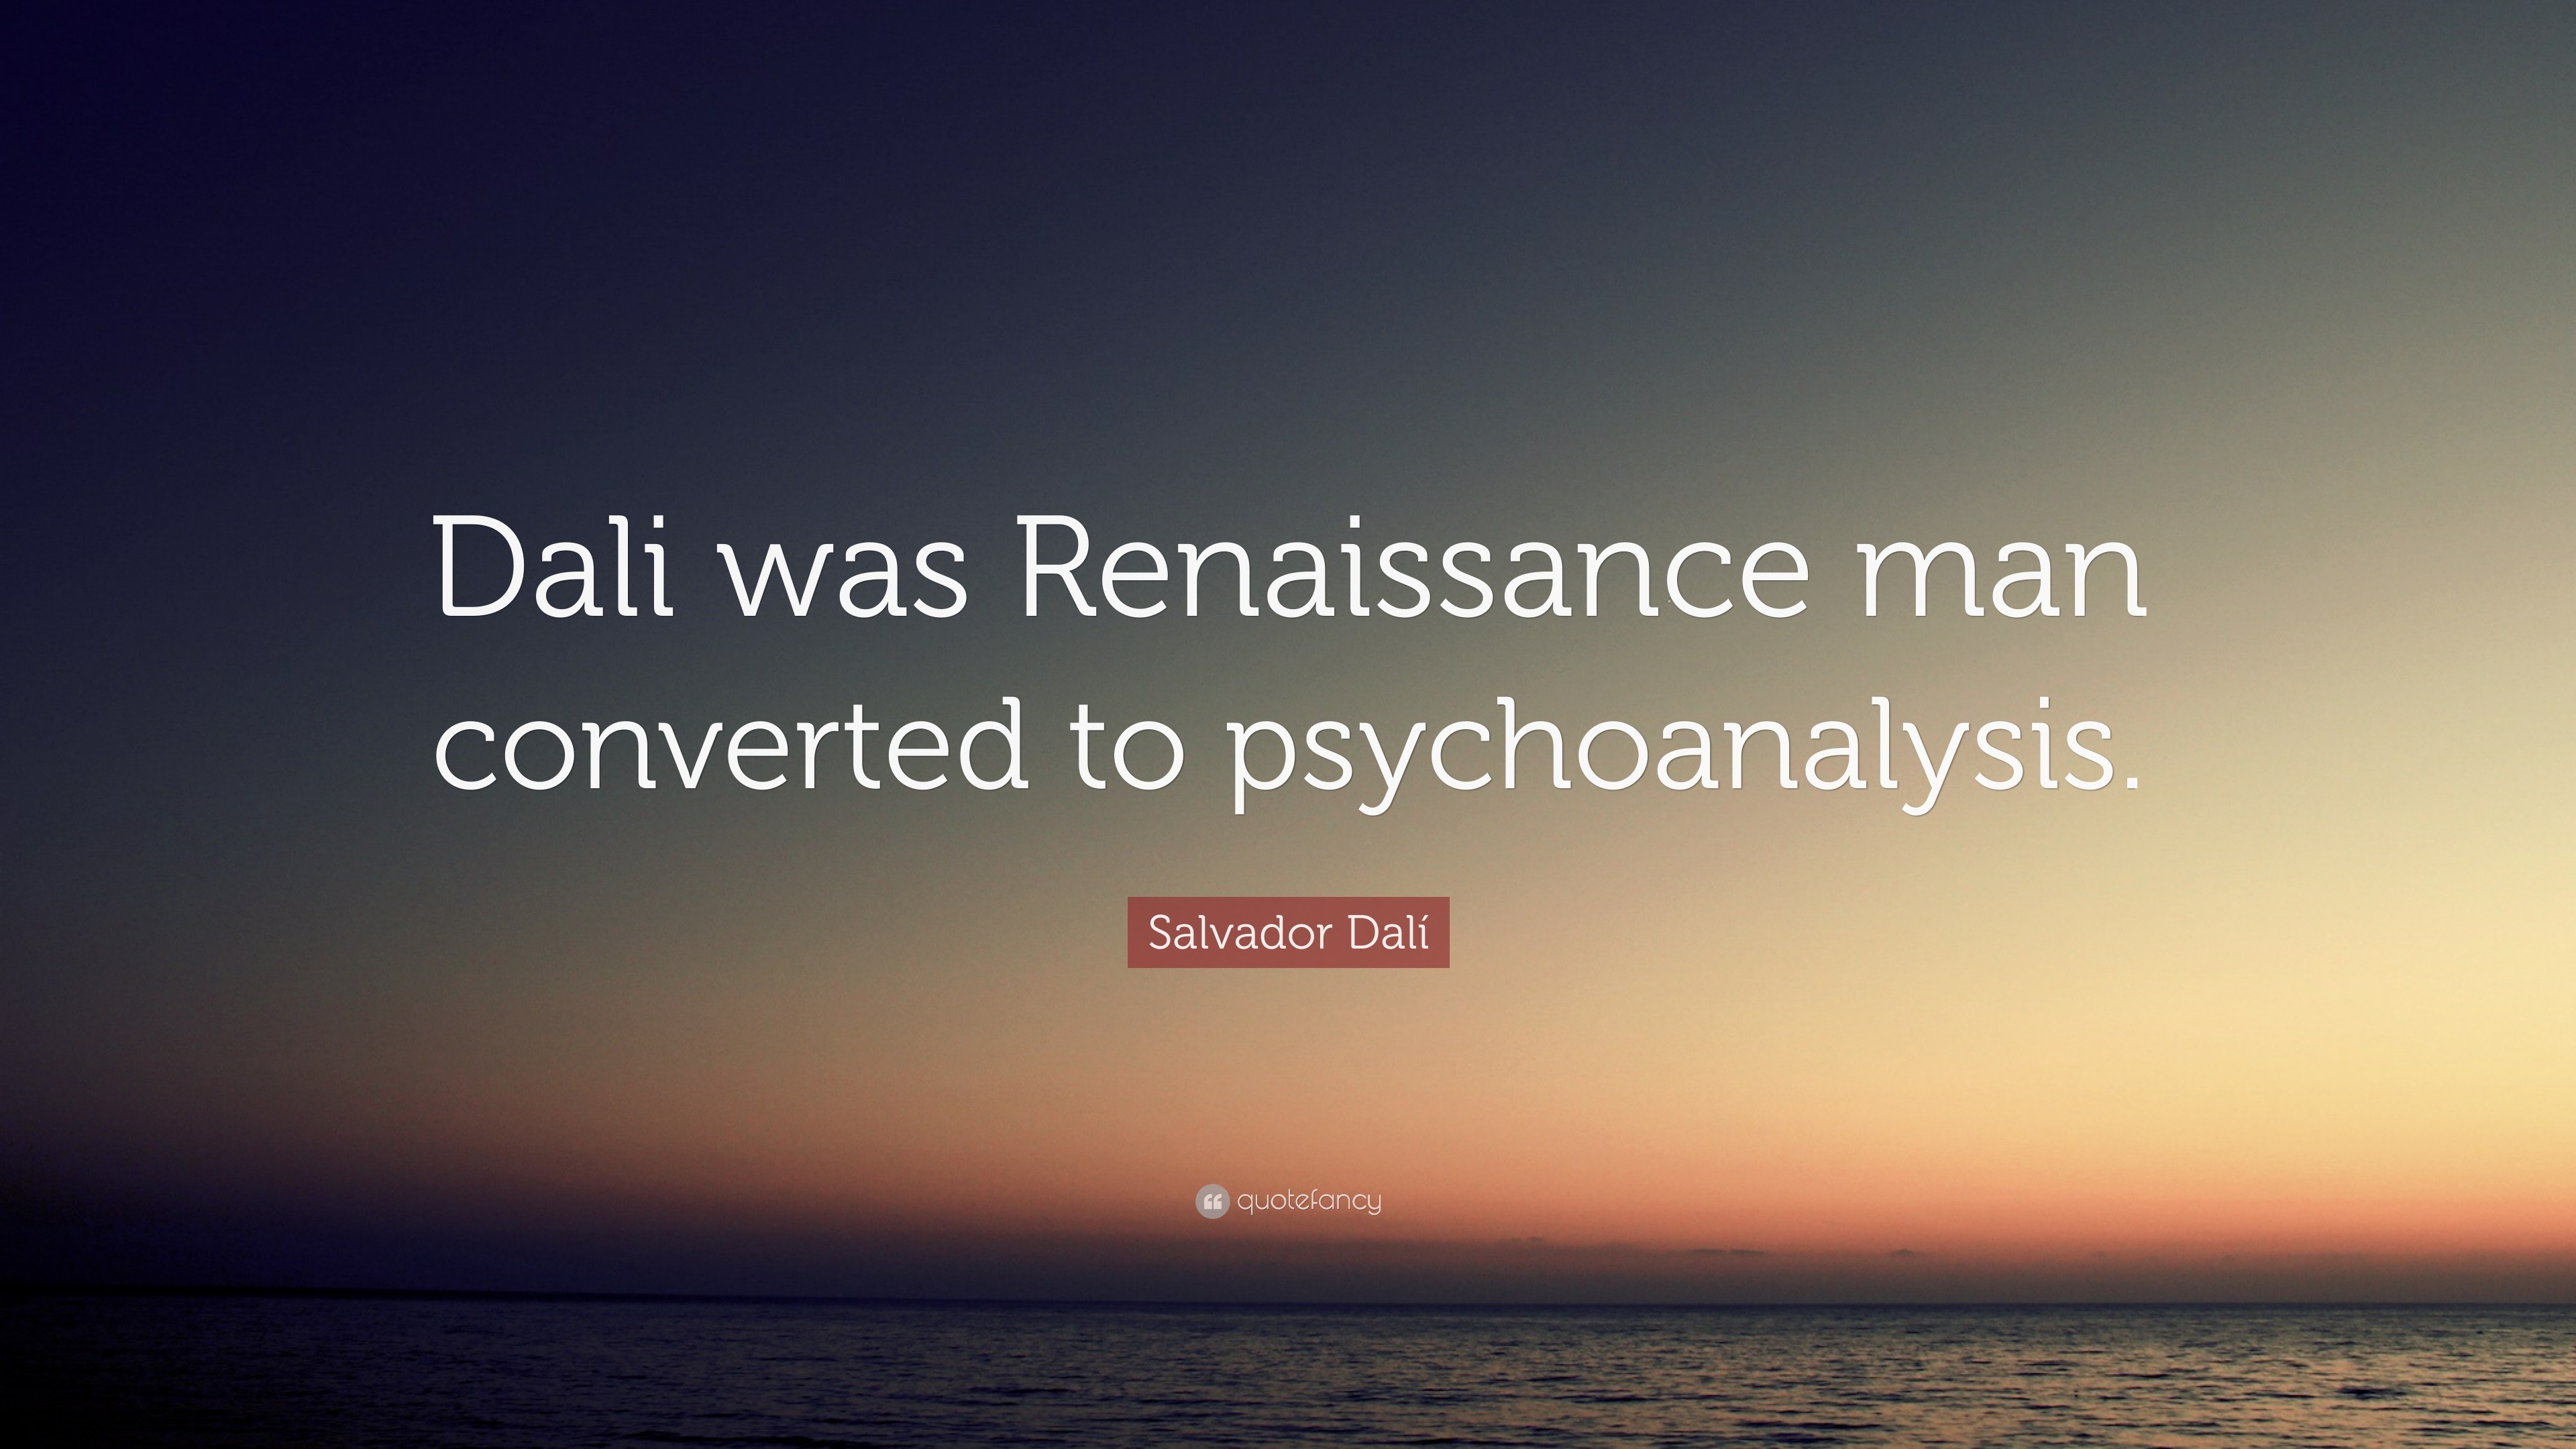 Salvador Dalí Quote: "Dali was Renaissance man converted to psychoanalysis." (10 wallpapers ...